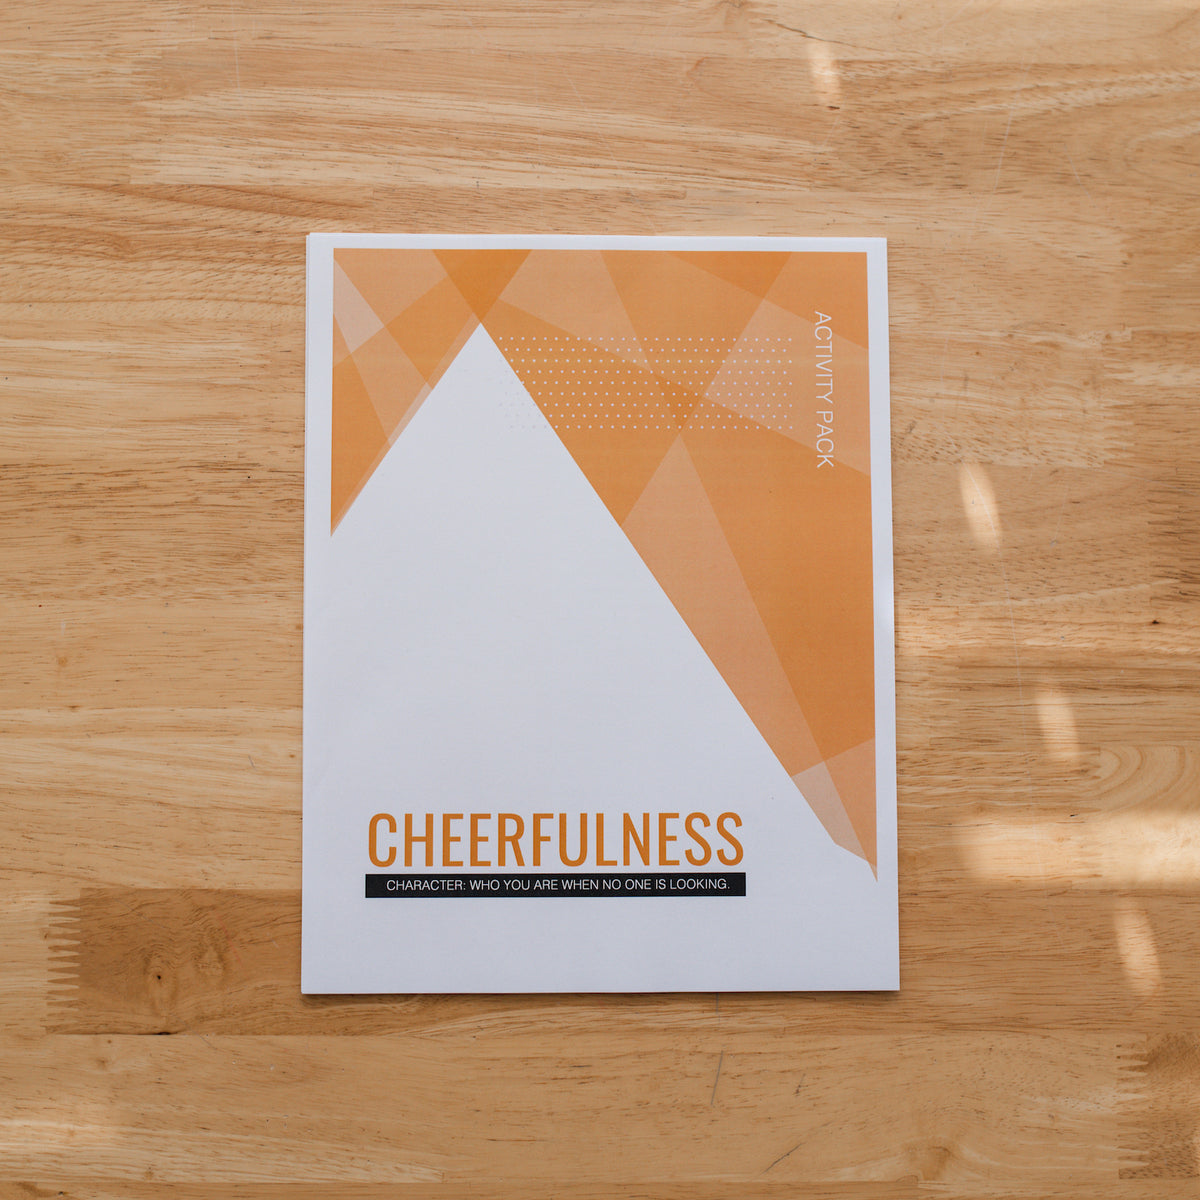 Youth Character Activity Pack - Cheerfulness (DOWNLOAD)